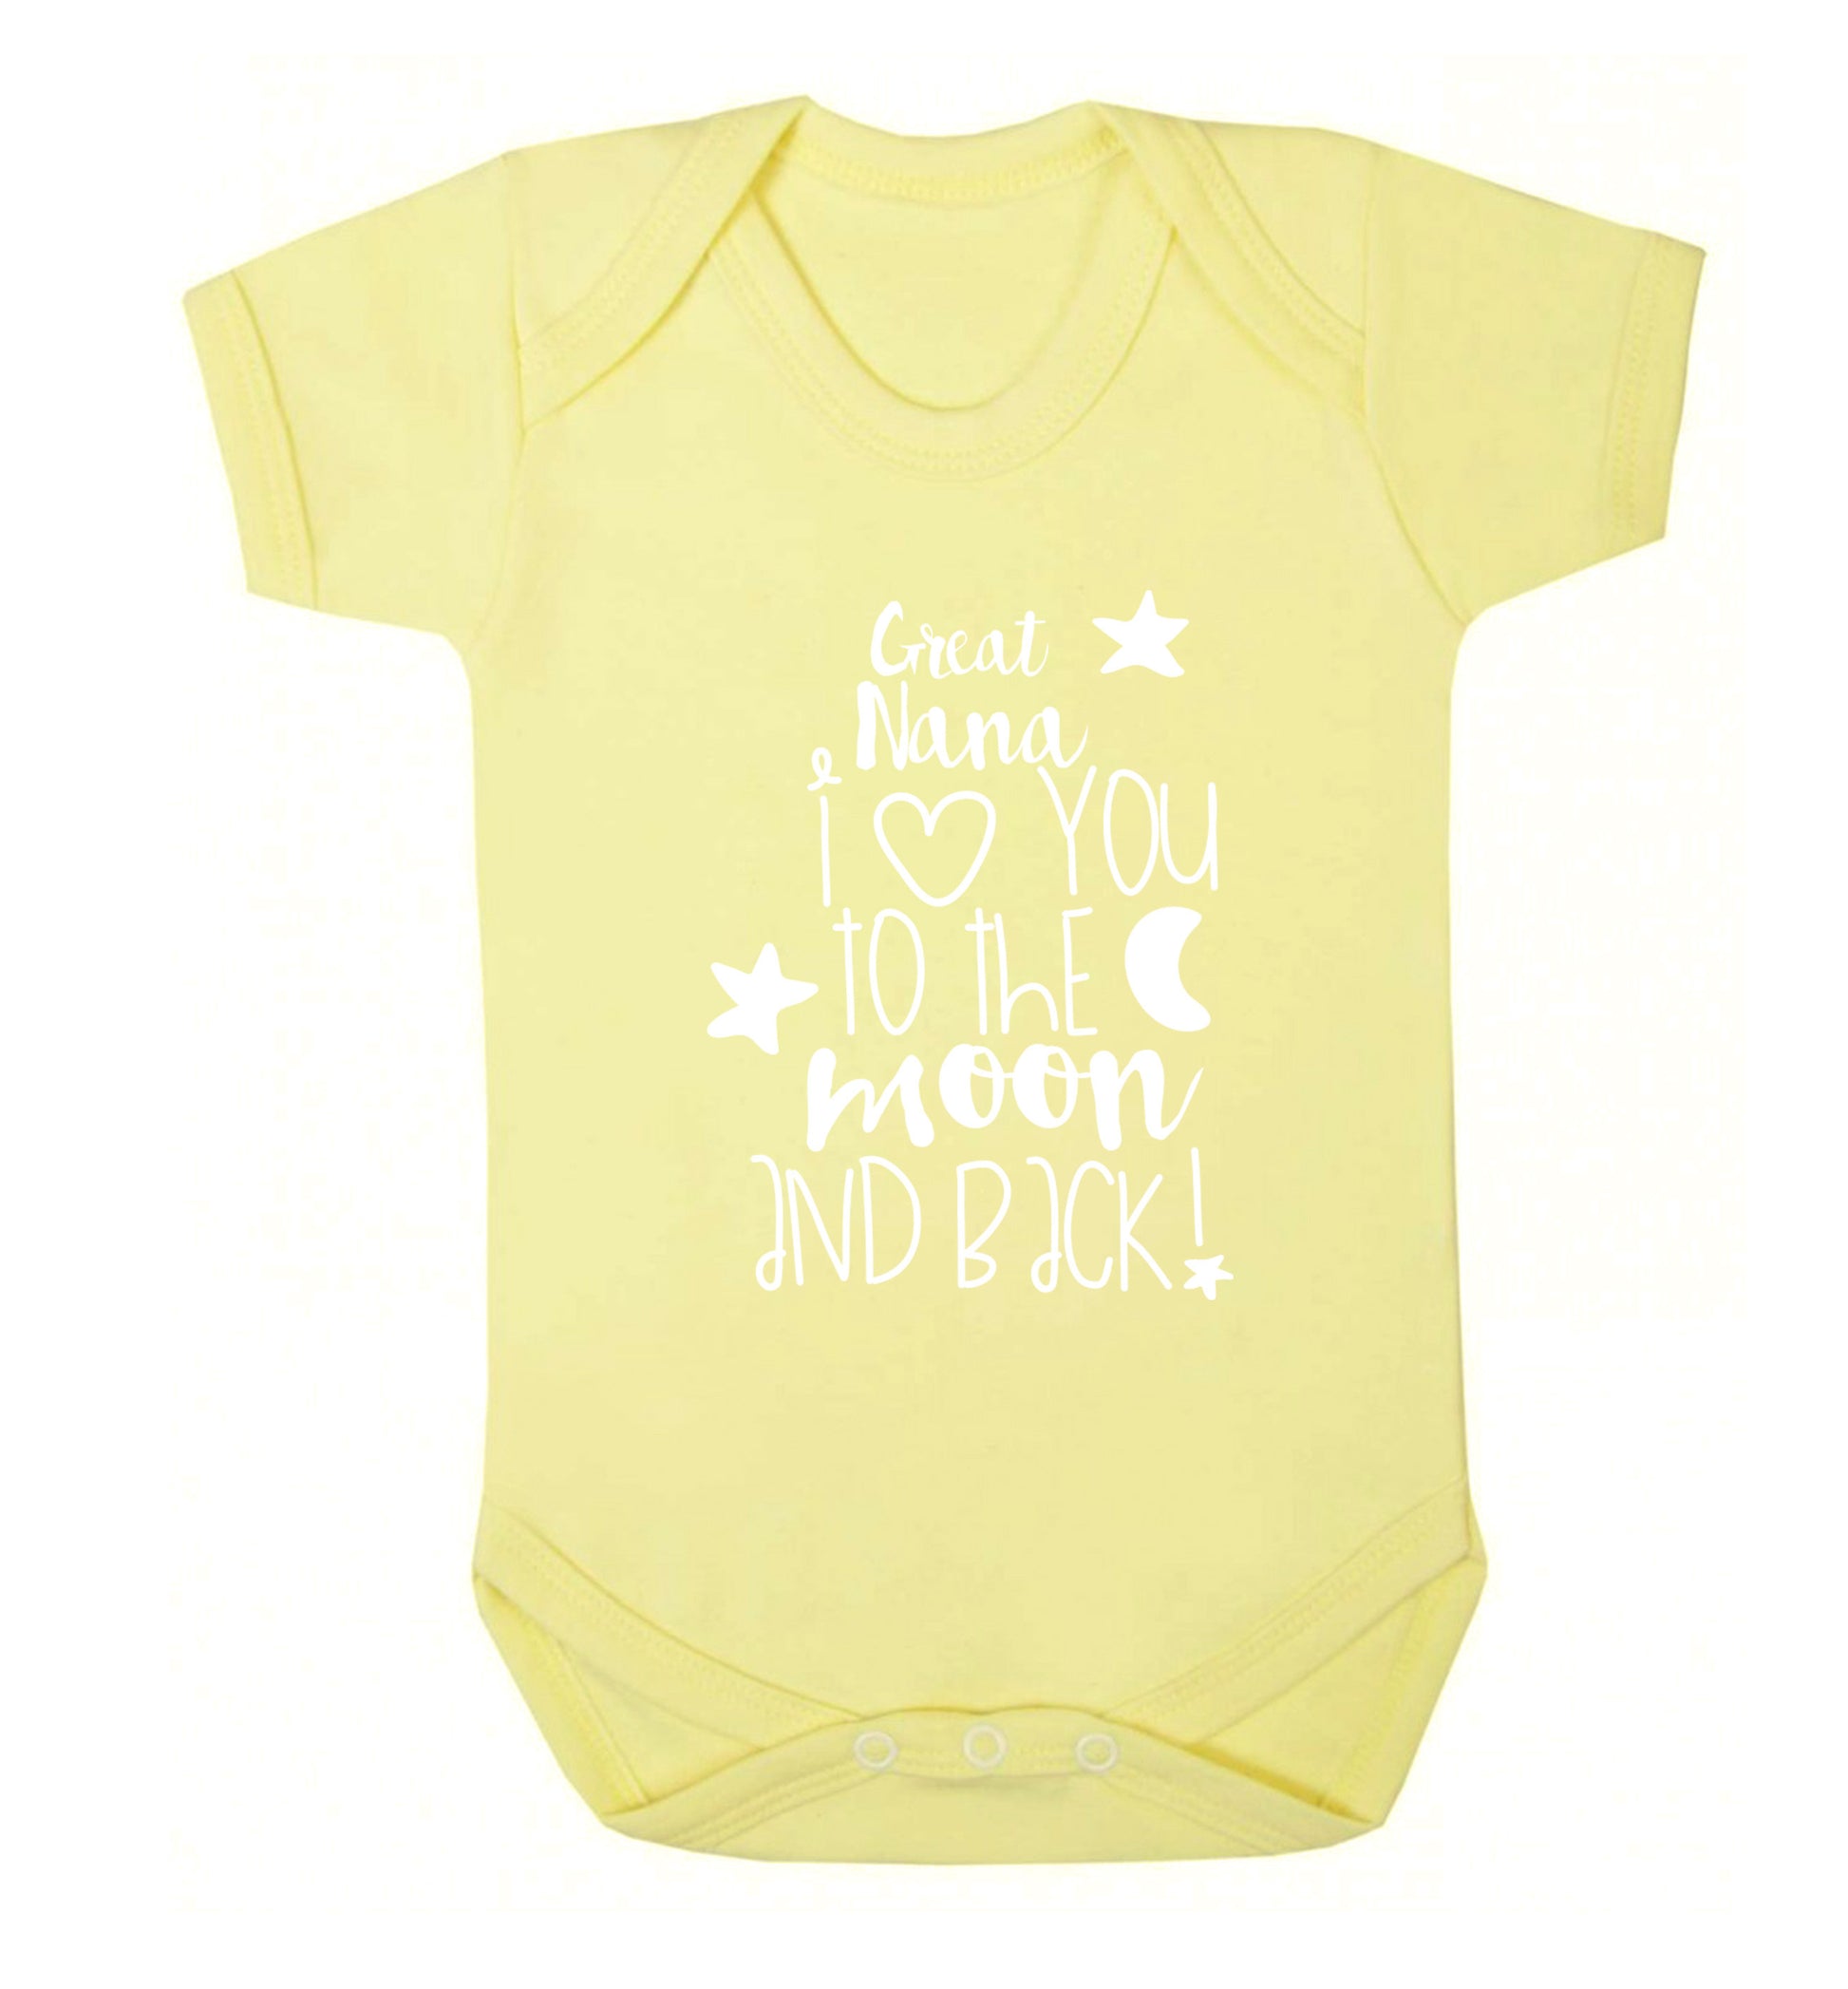 Great Nana I love you to the moon and back Baby Vest pale yellow 18-24 months